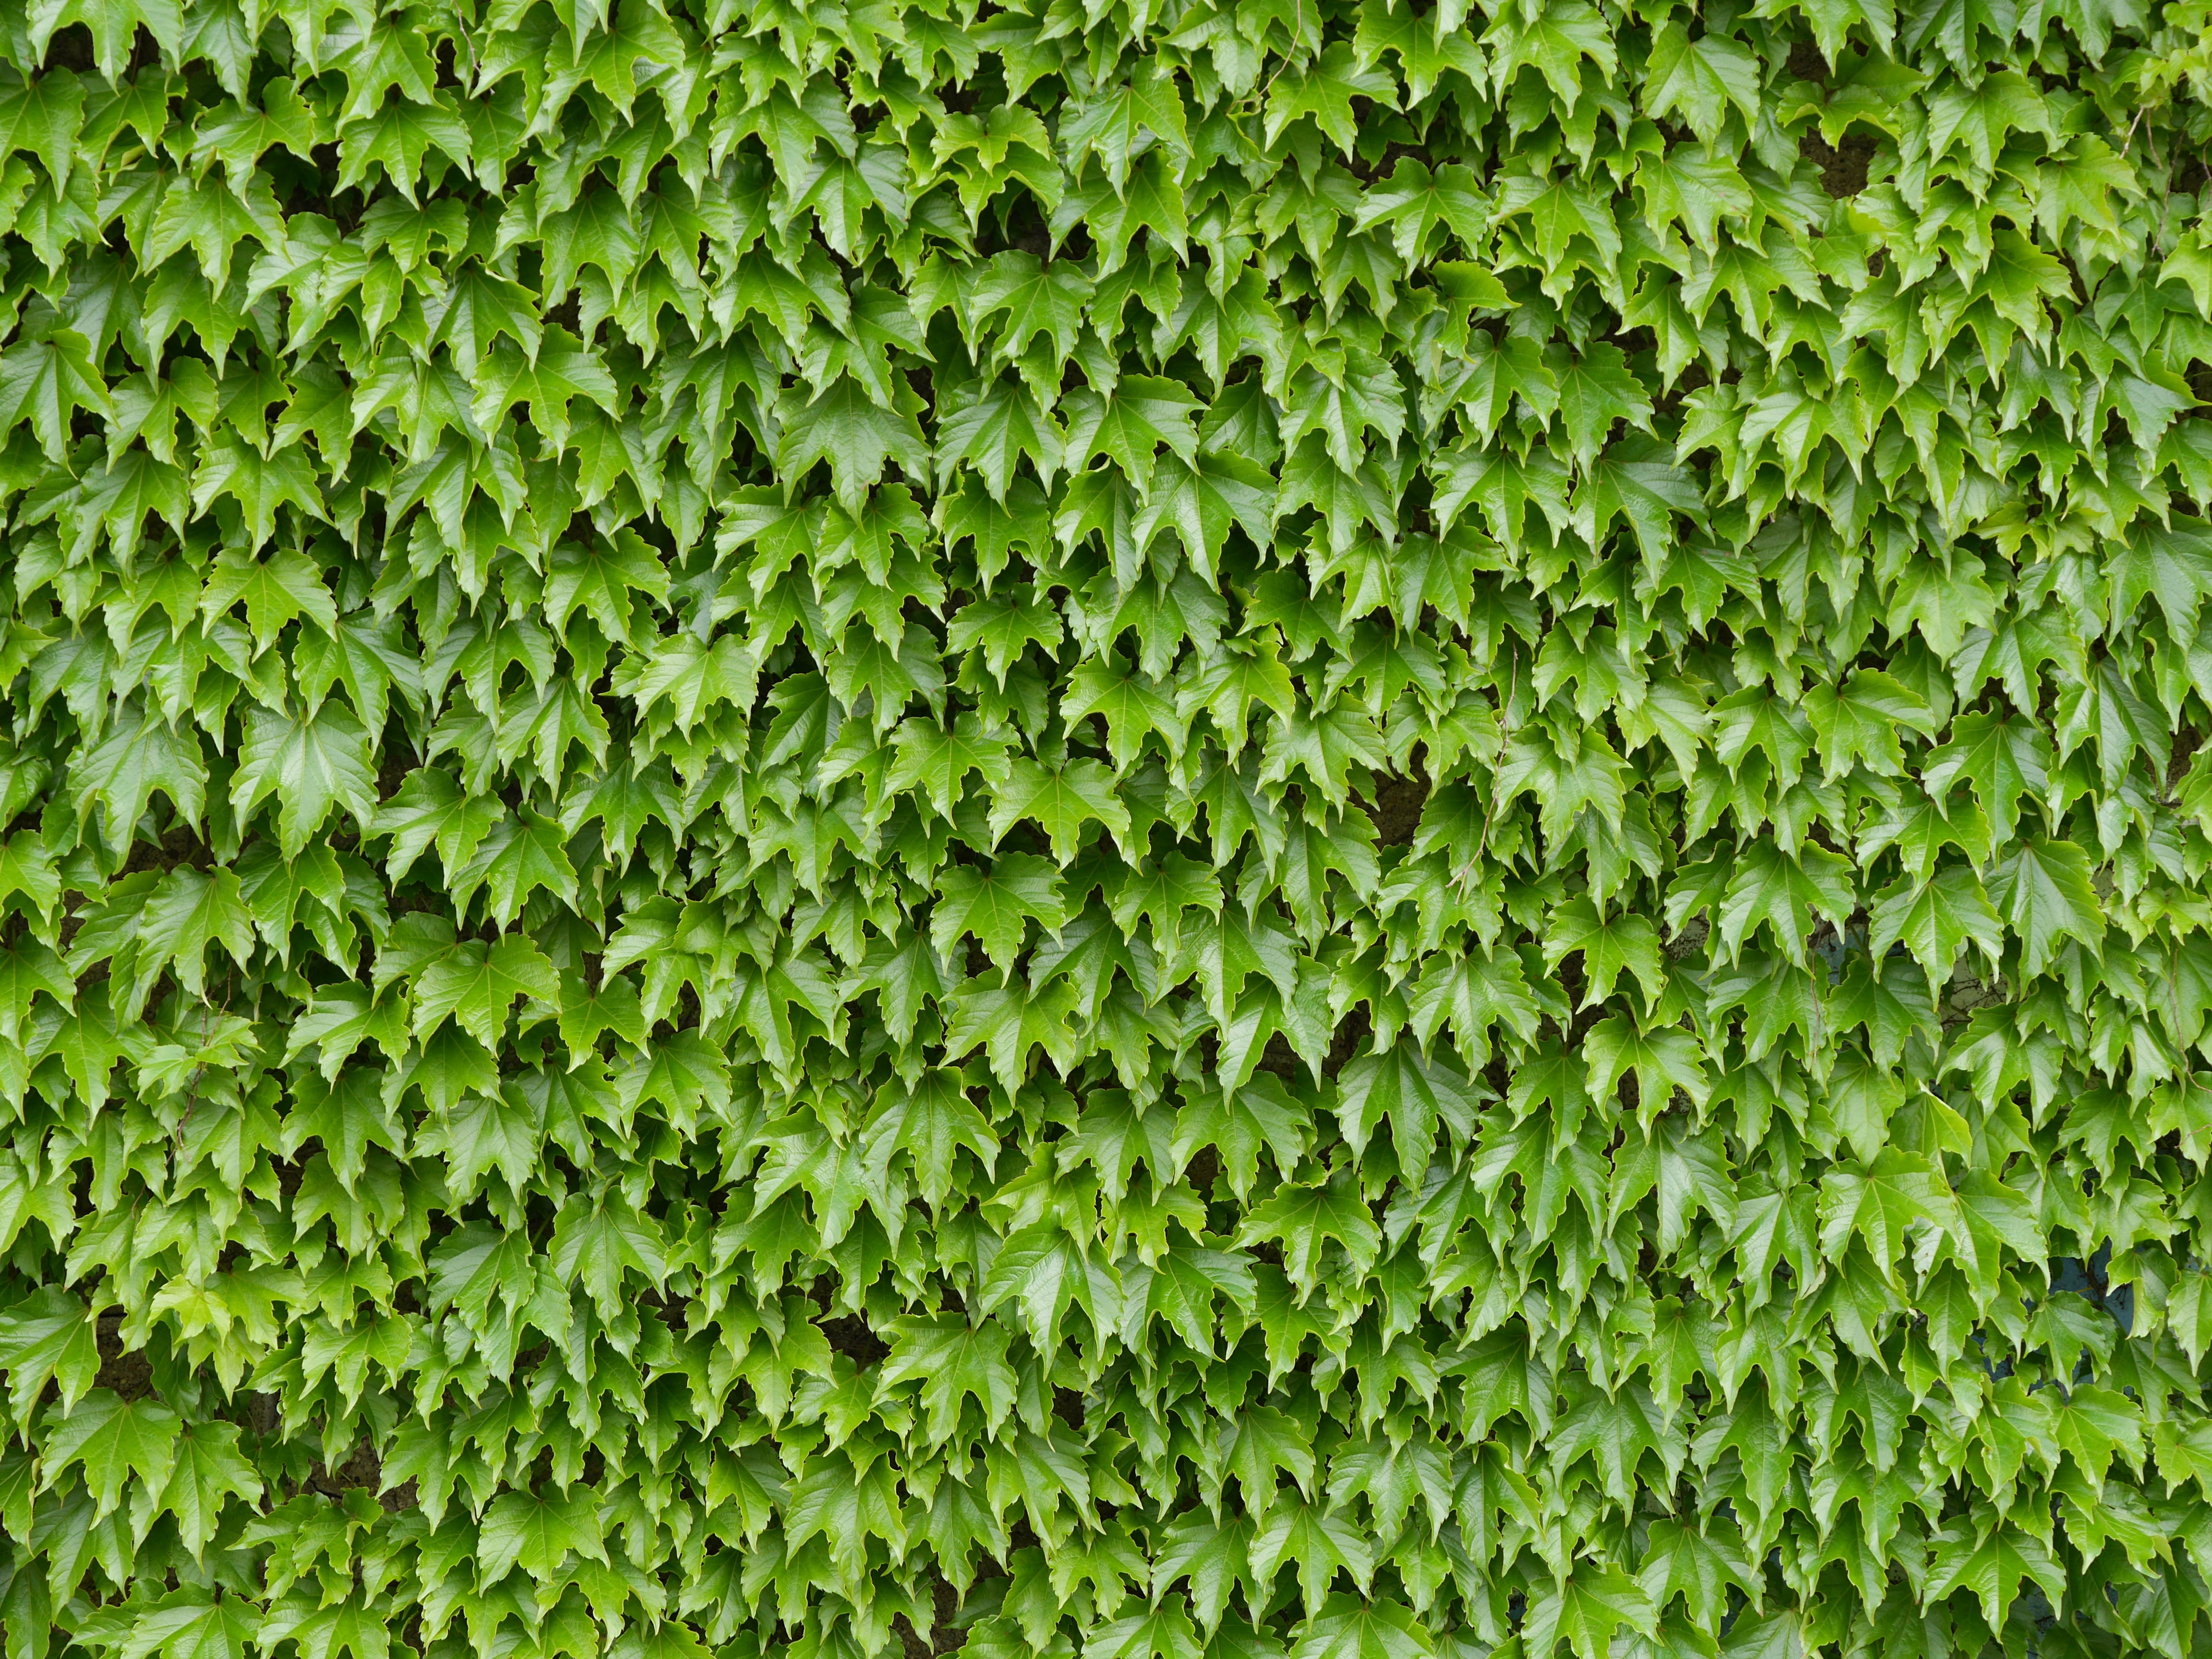 File:Wall of Ivy Leaves 1.jpg - Wikimedia Commons